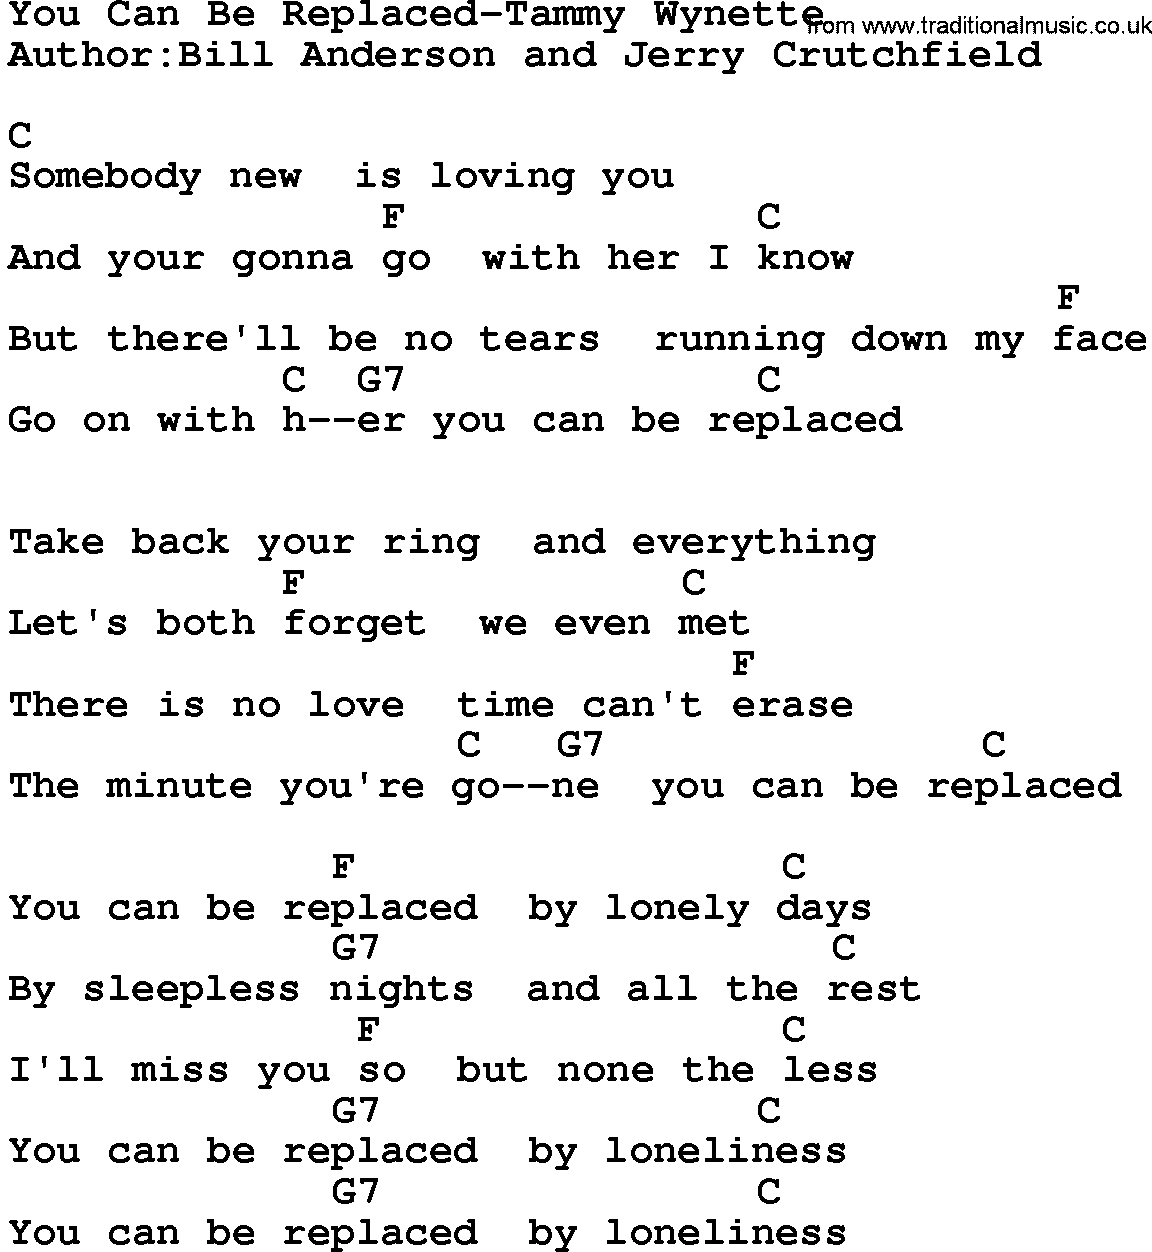 Country music song: You Can Be Replaced-Tammy Wynette lyrics and chords